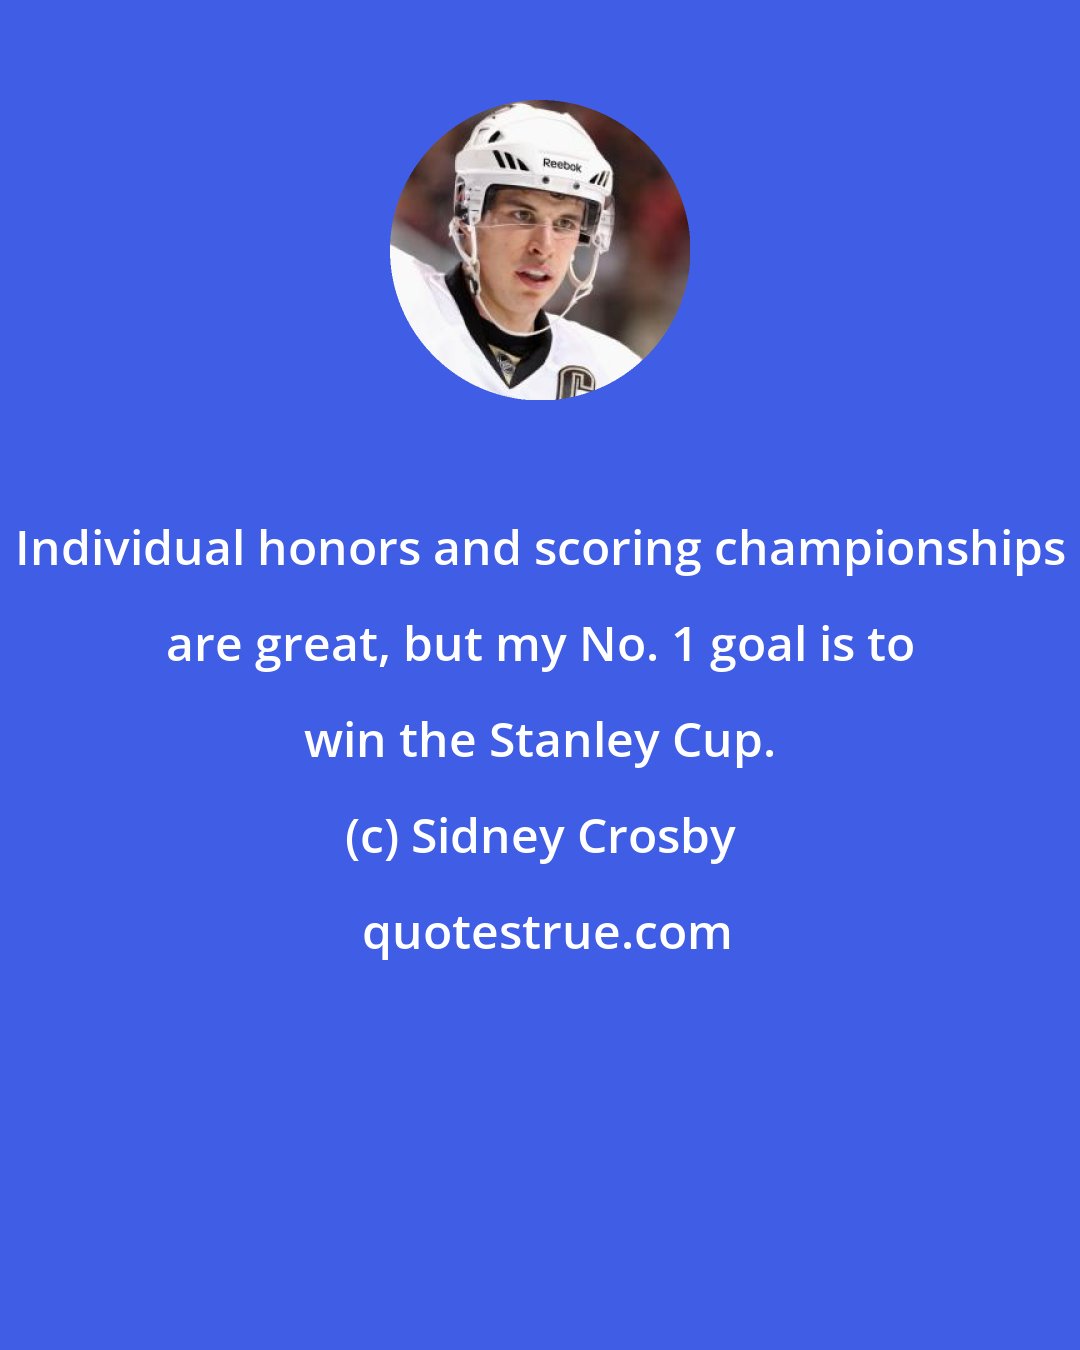 Sidney Crosby: Individual honors and scoring championships are great, but my No. 1 goal is to win the Stanley Cup.